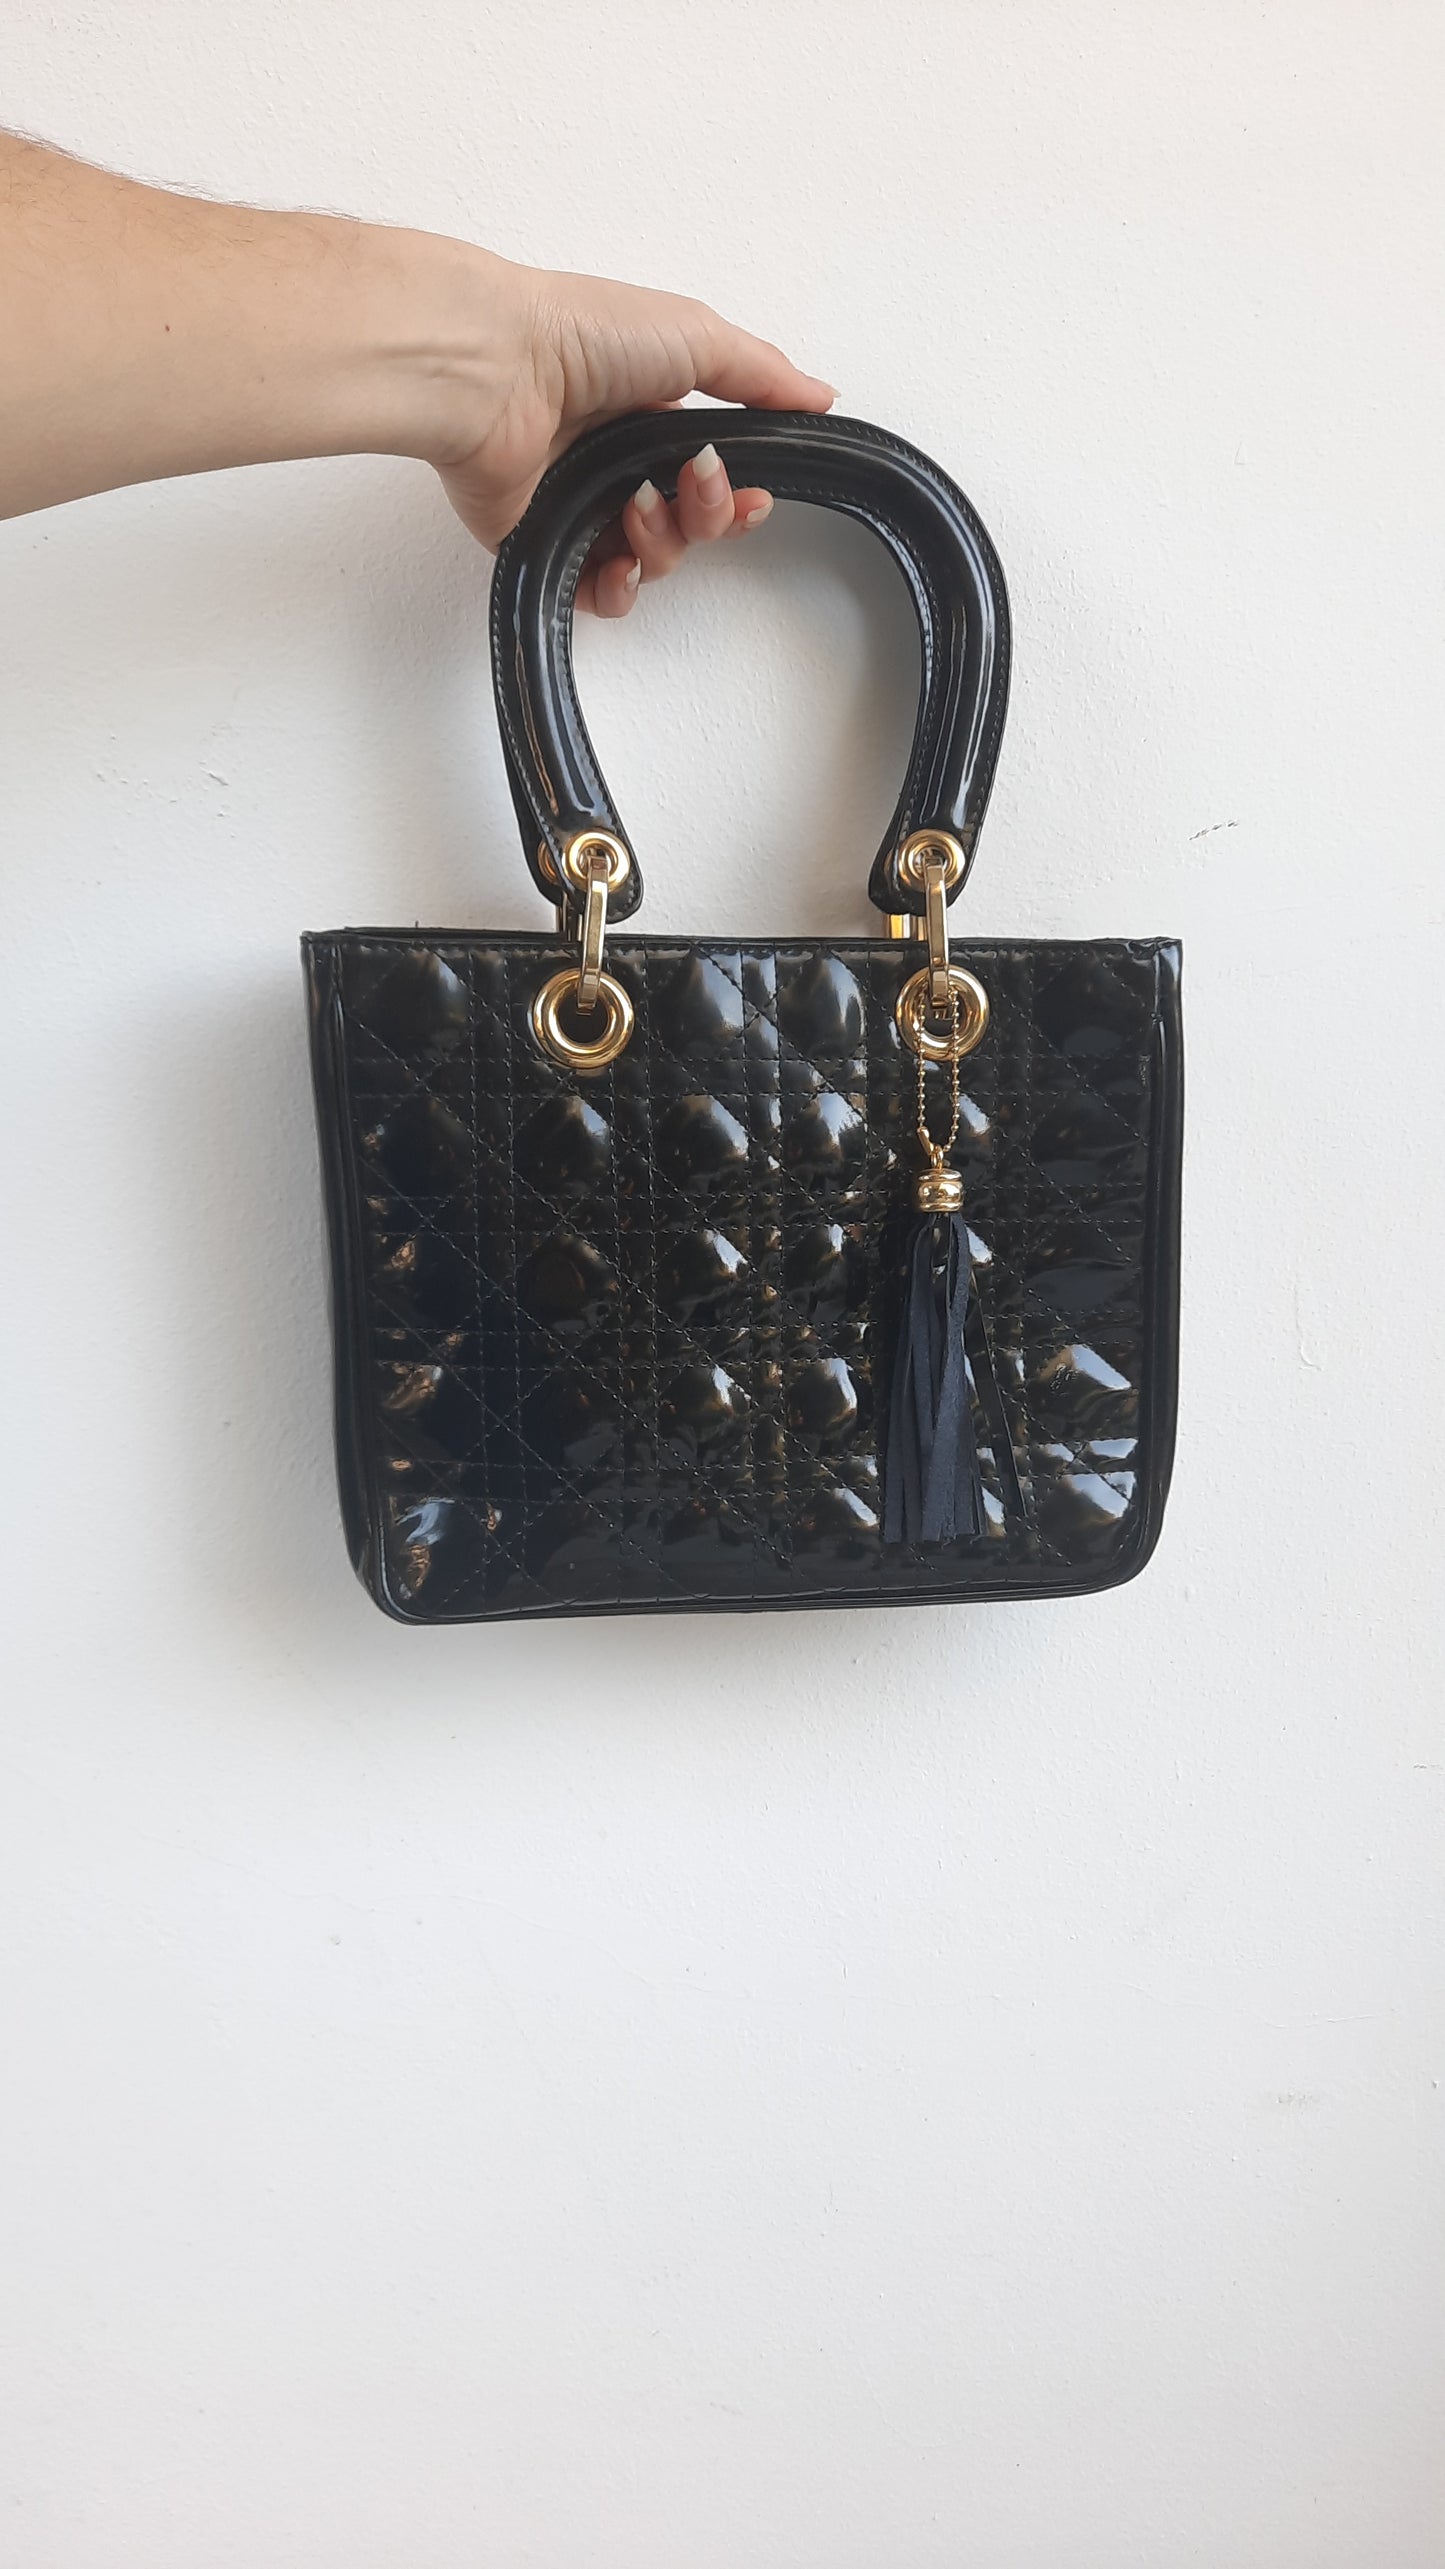 Vintage Black Patent Leather Quilted Handbag, Made in Cyprus